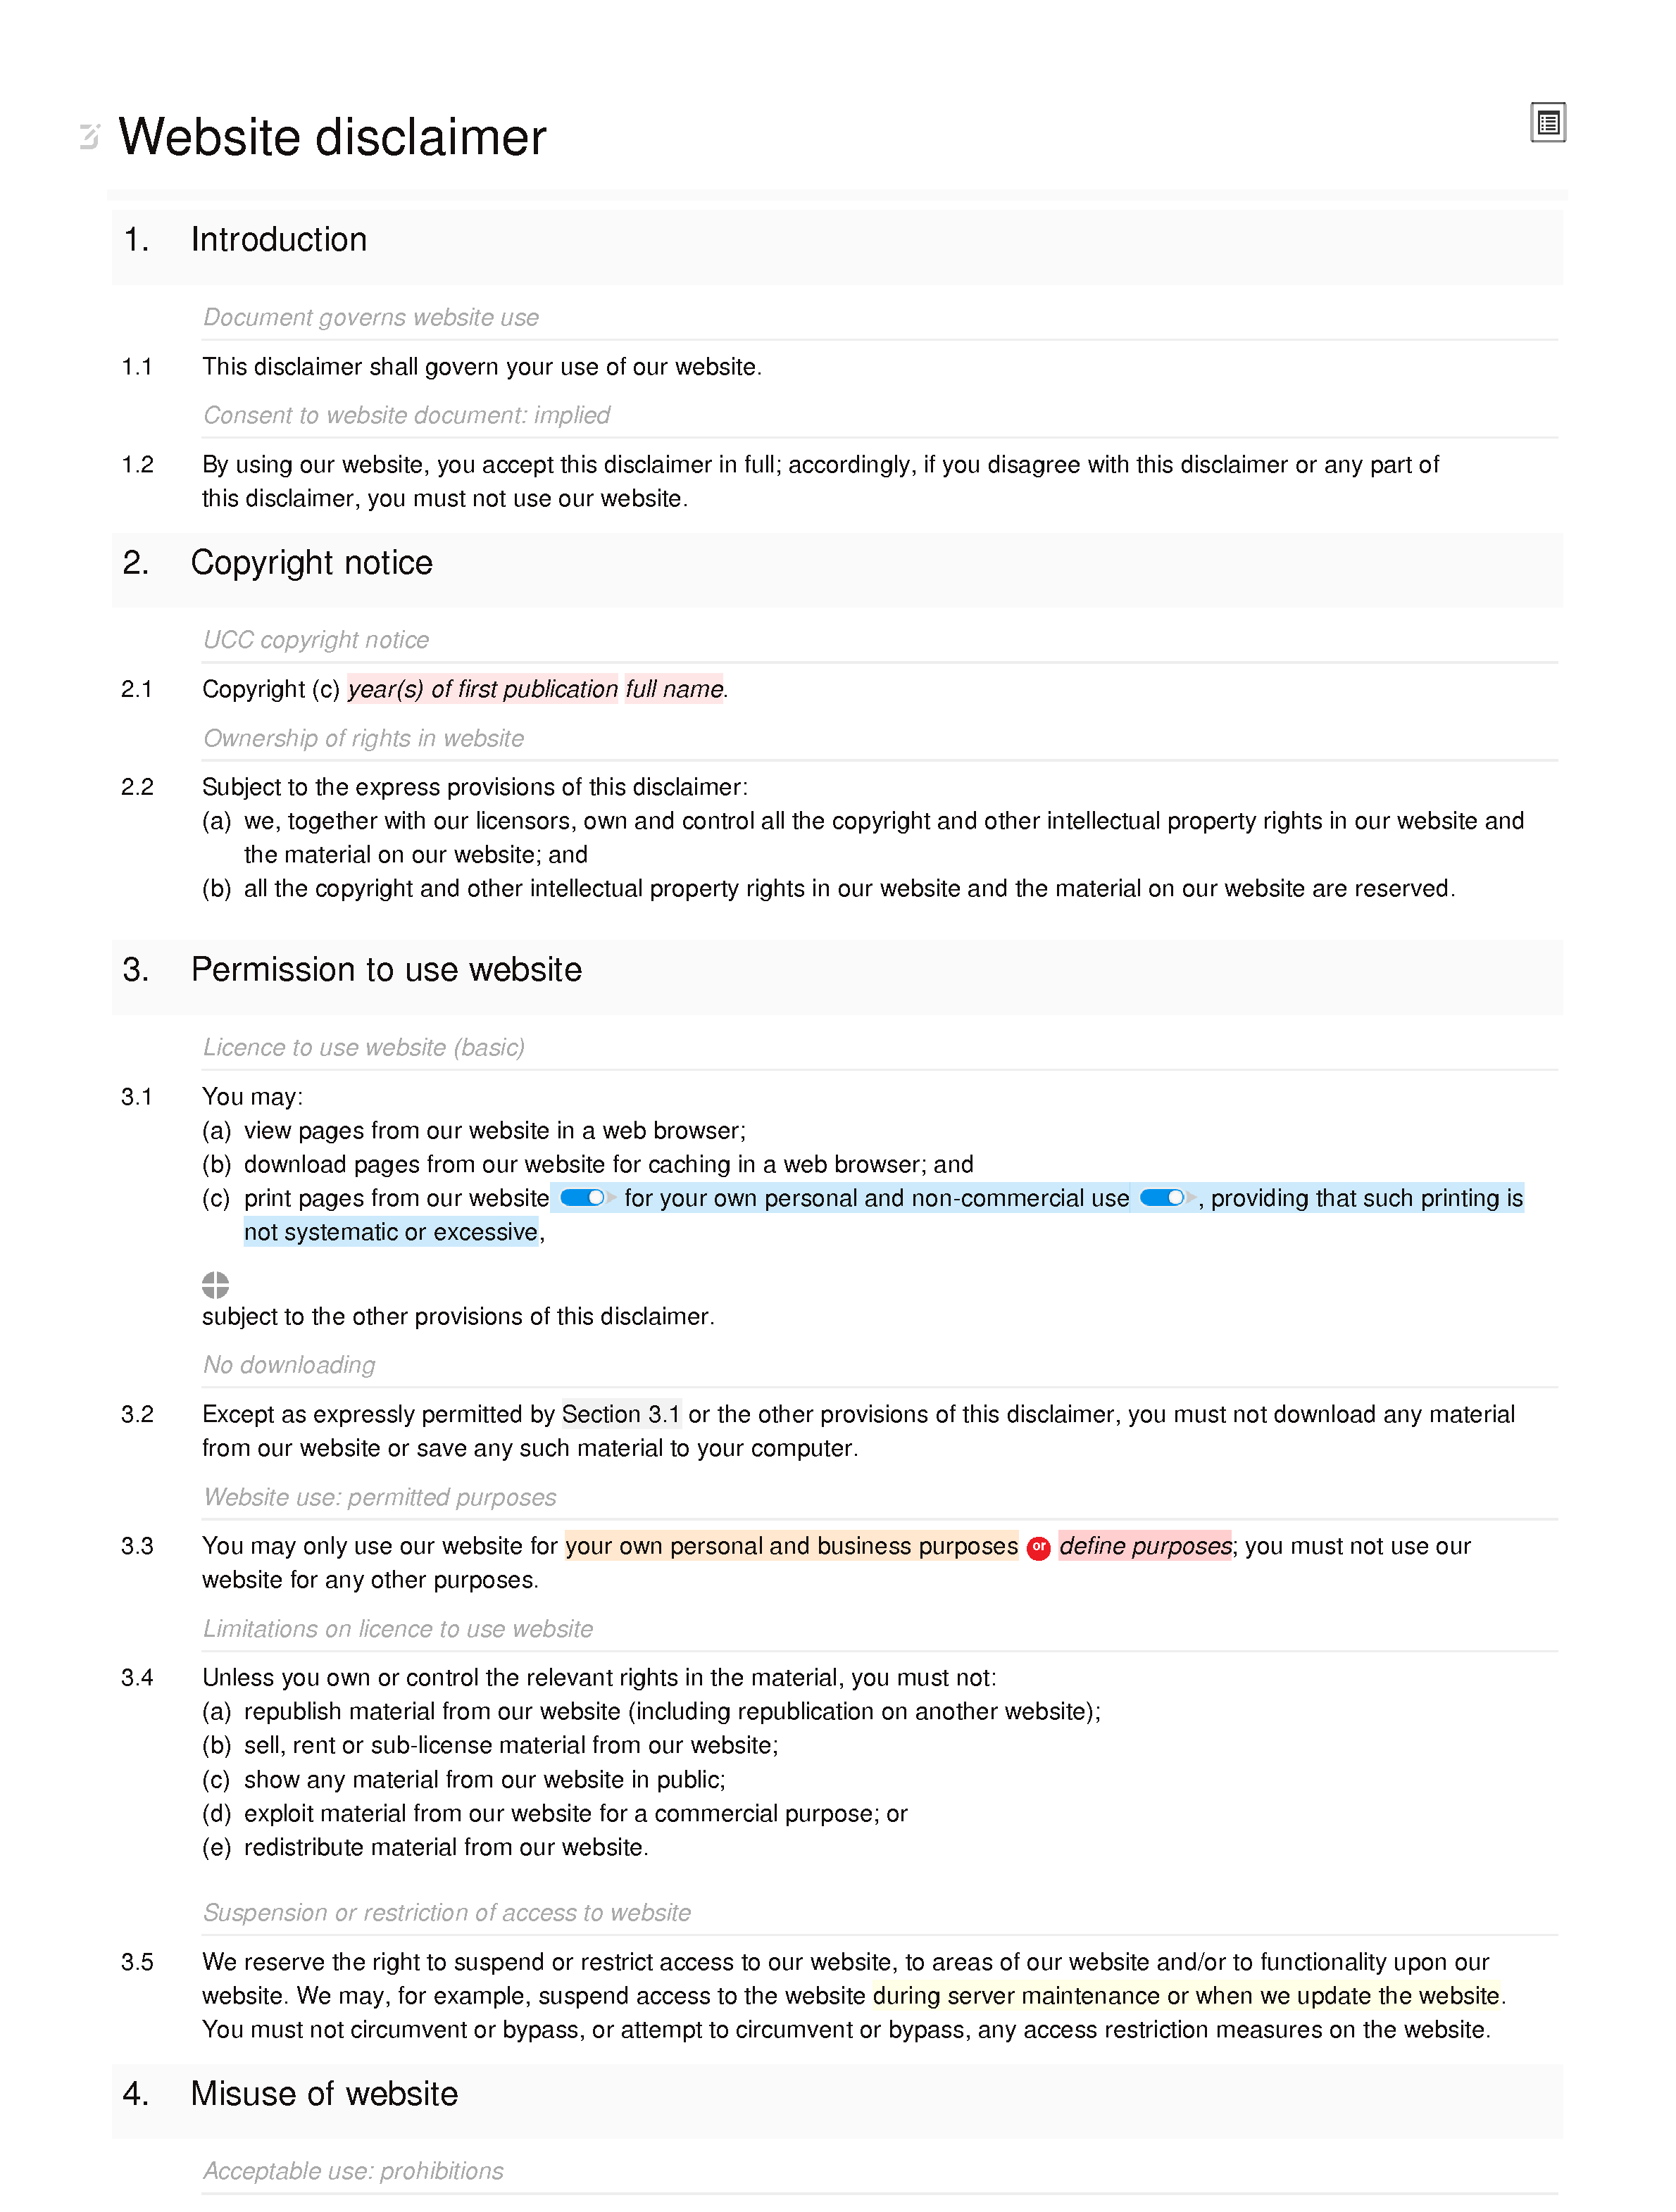 Website disclaimer document editor preview